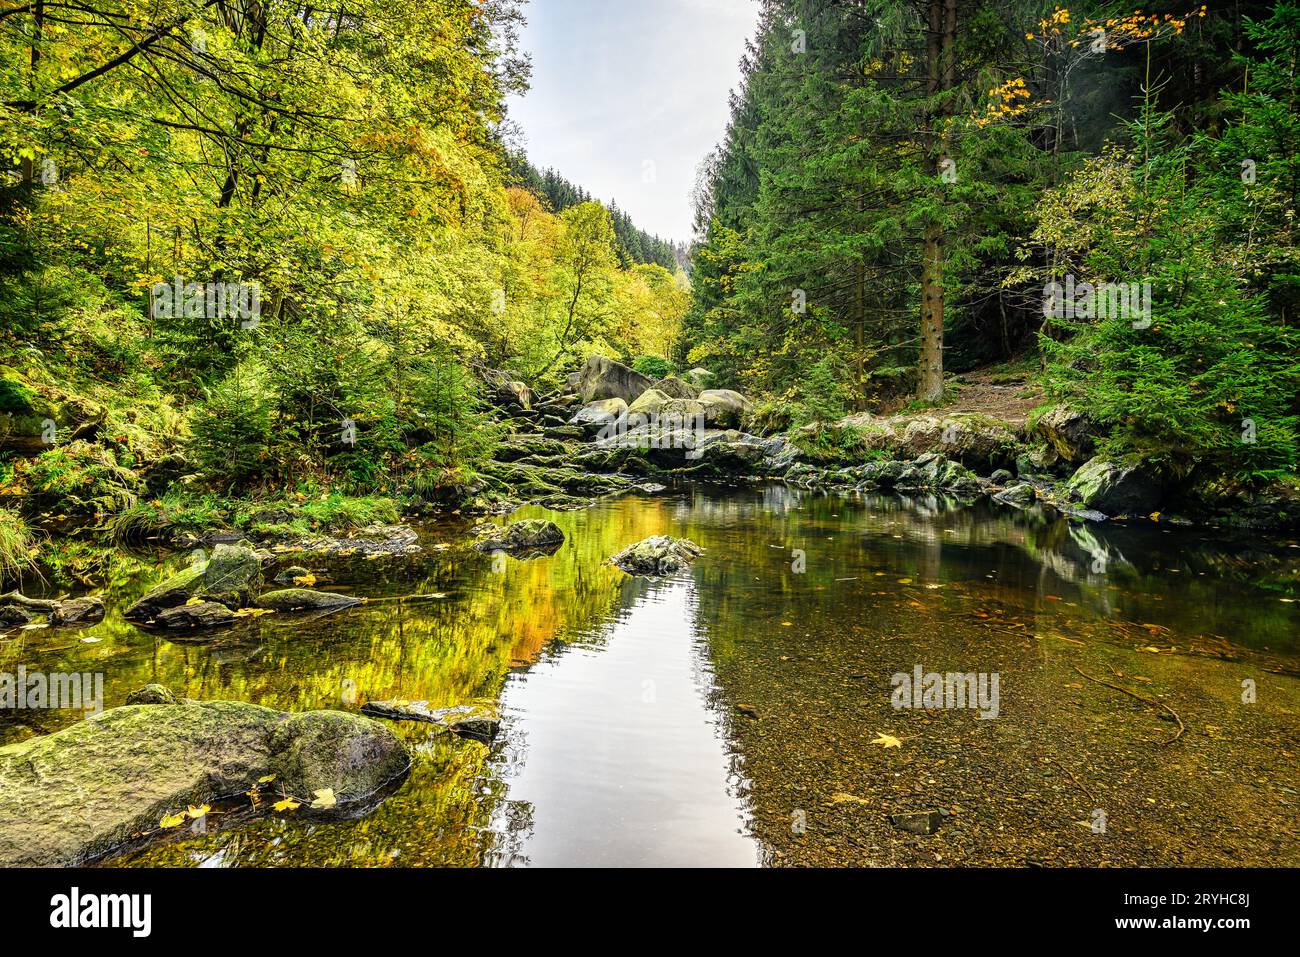 Peaceful scene of the river bed on Engagement island in the Oker in the Harz Mountains, Germany Stock Photo